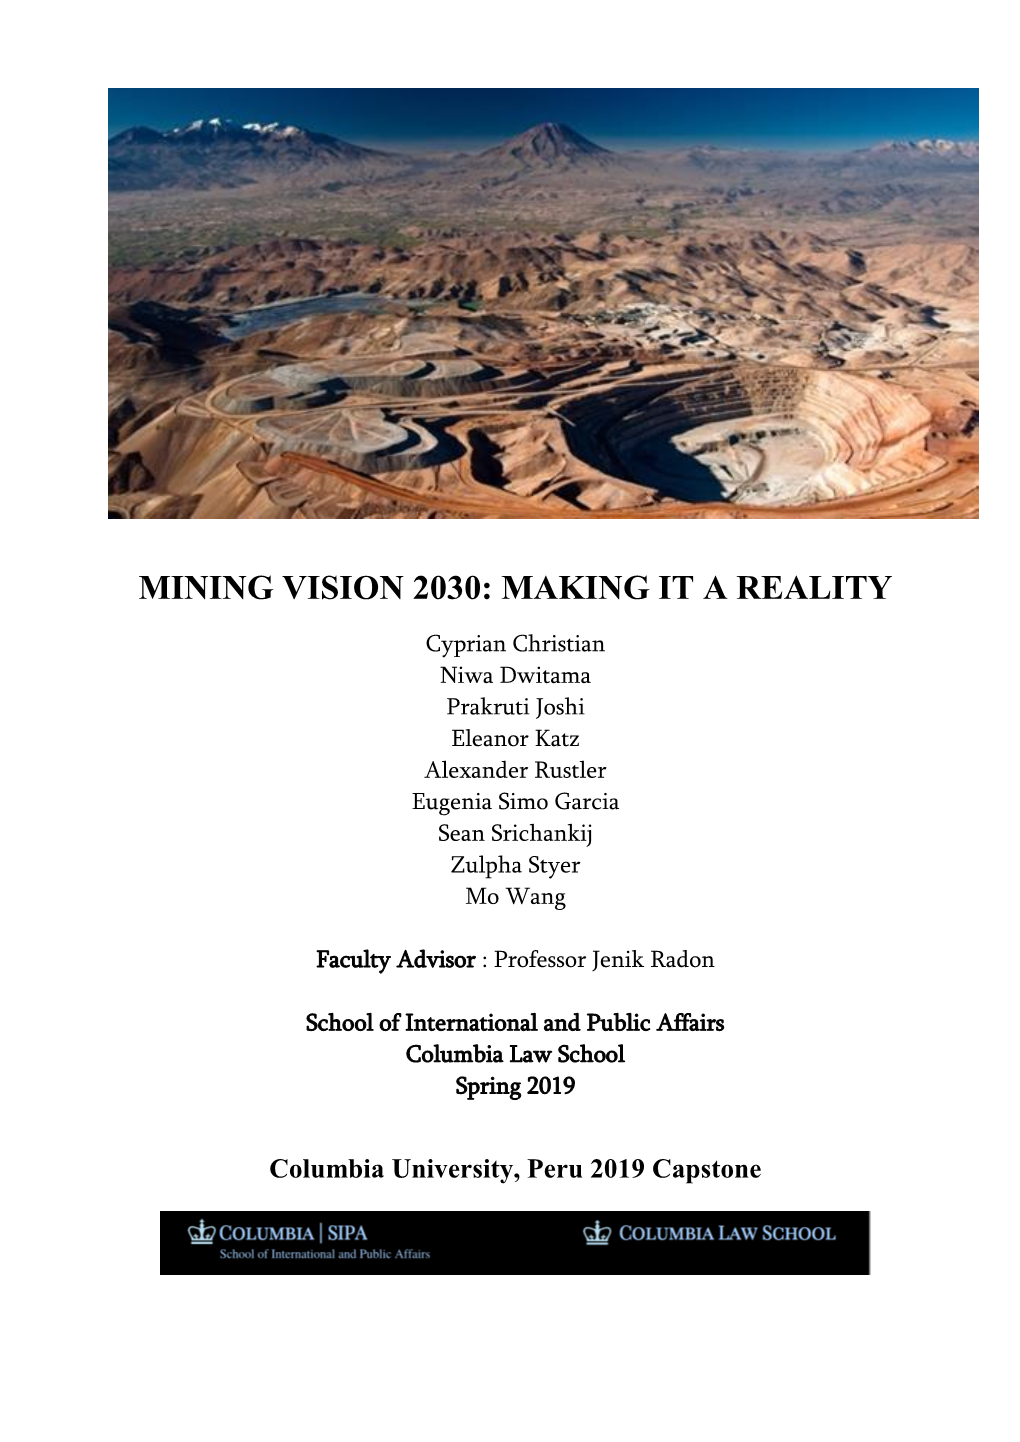 Mining Vision 2030: Making It a Reality